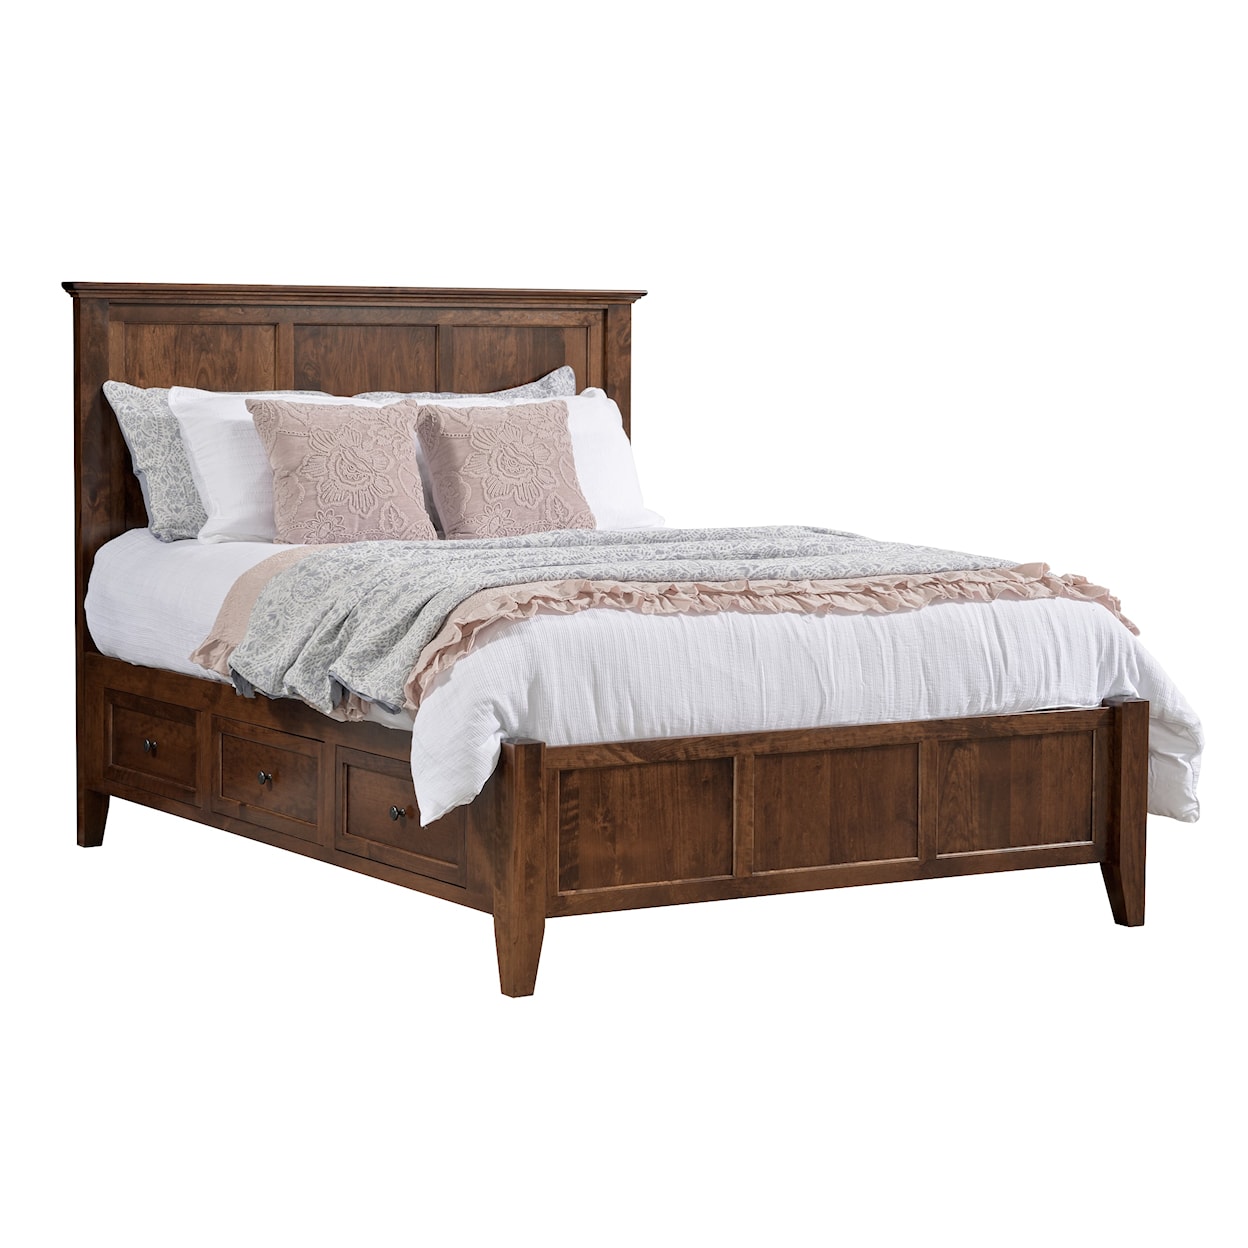 Millcraft Albany King PANEL BED W/ DRAWER UNITS RAISED 6''